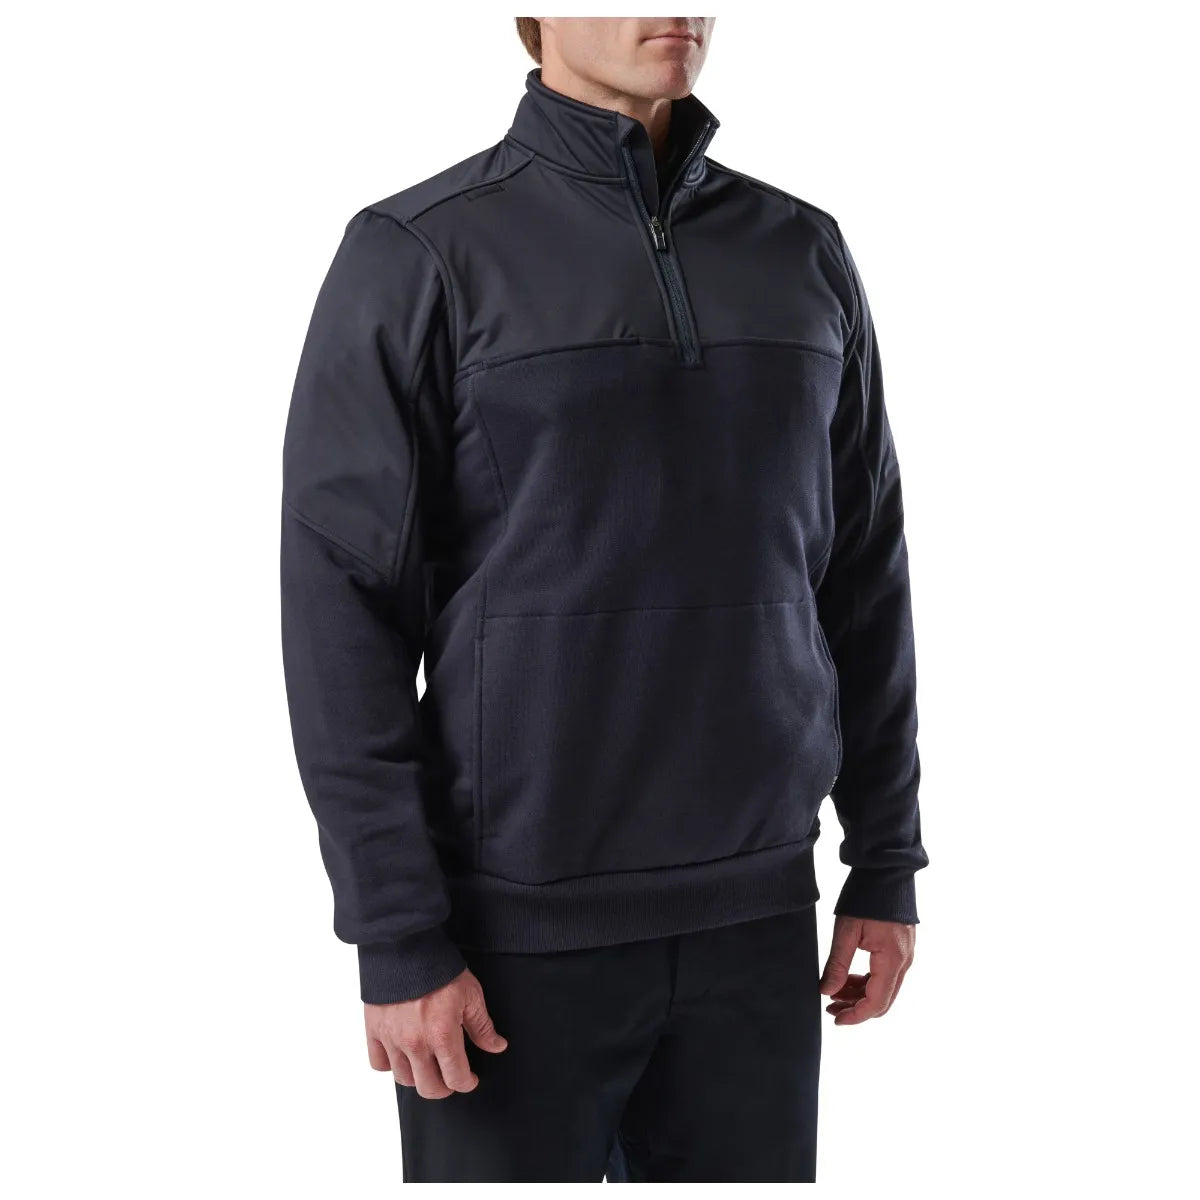 5.11 Tactical WATER-REPELLENT JOB SHIRT 2.0 72537 - Newest Products